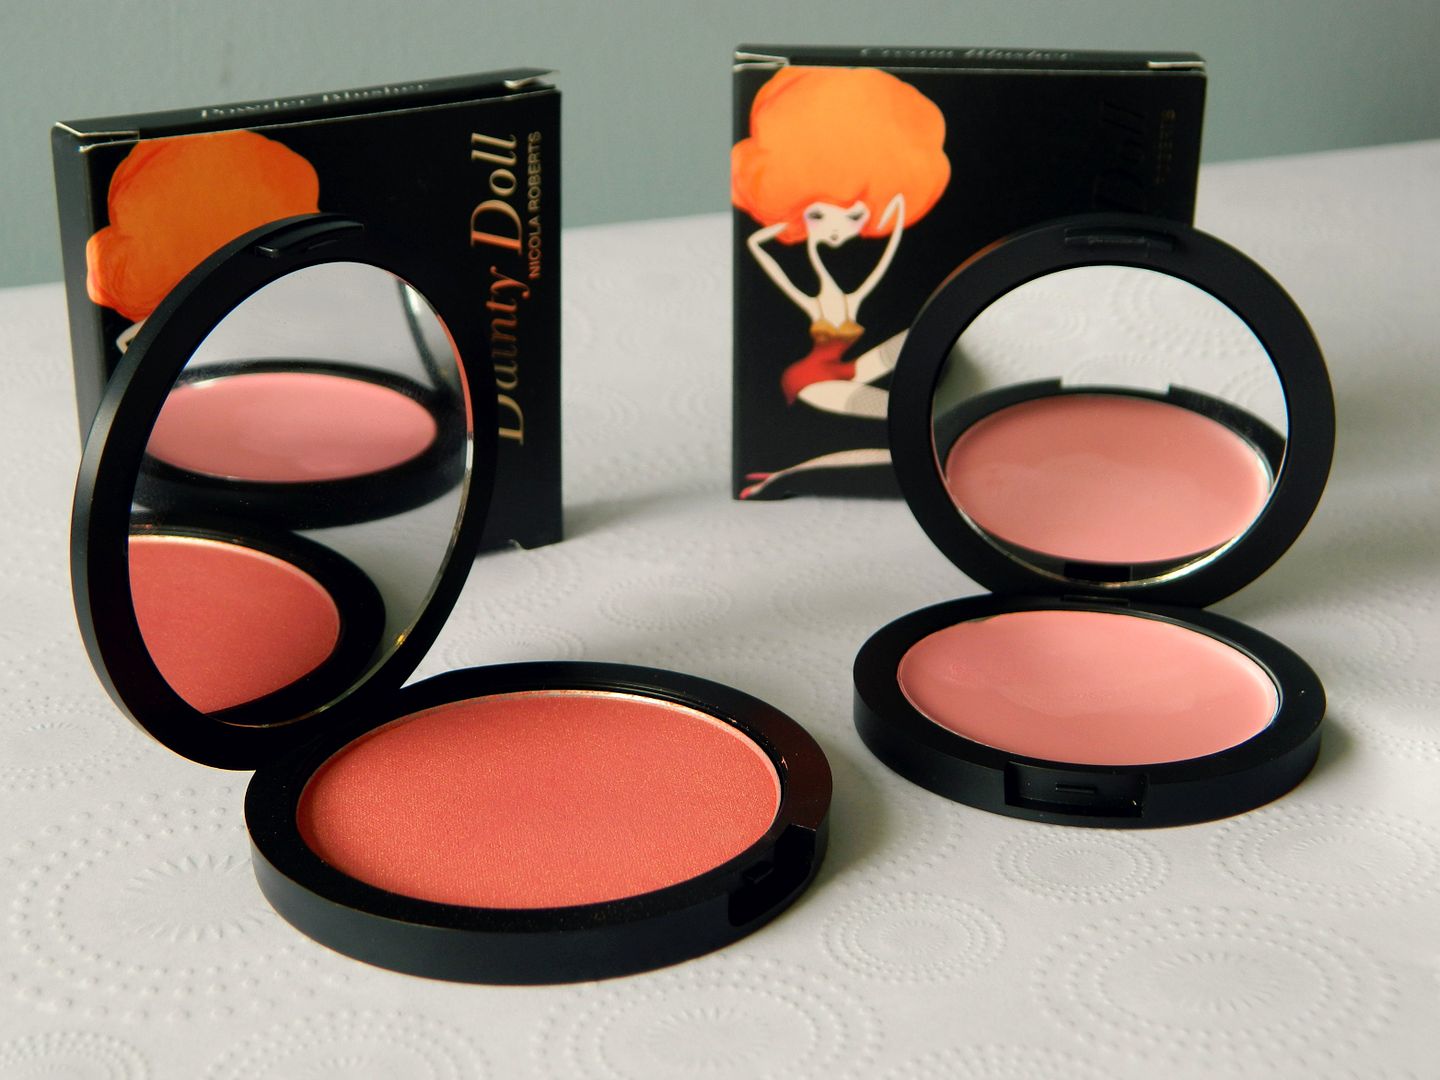 Dainty Doll Cream Powder Blushers in You Are My Sunshine And Paper Roses